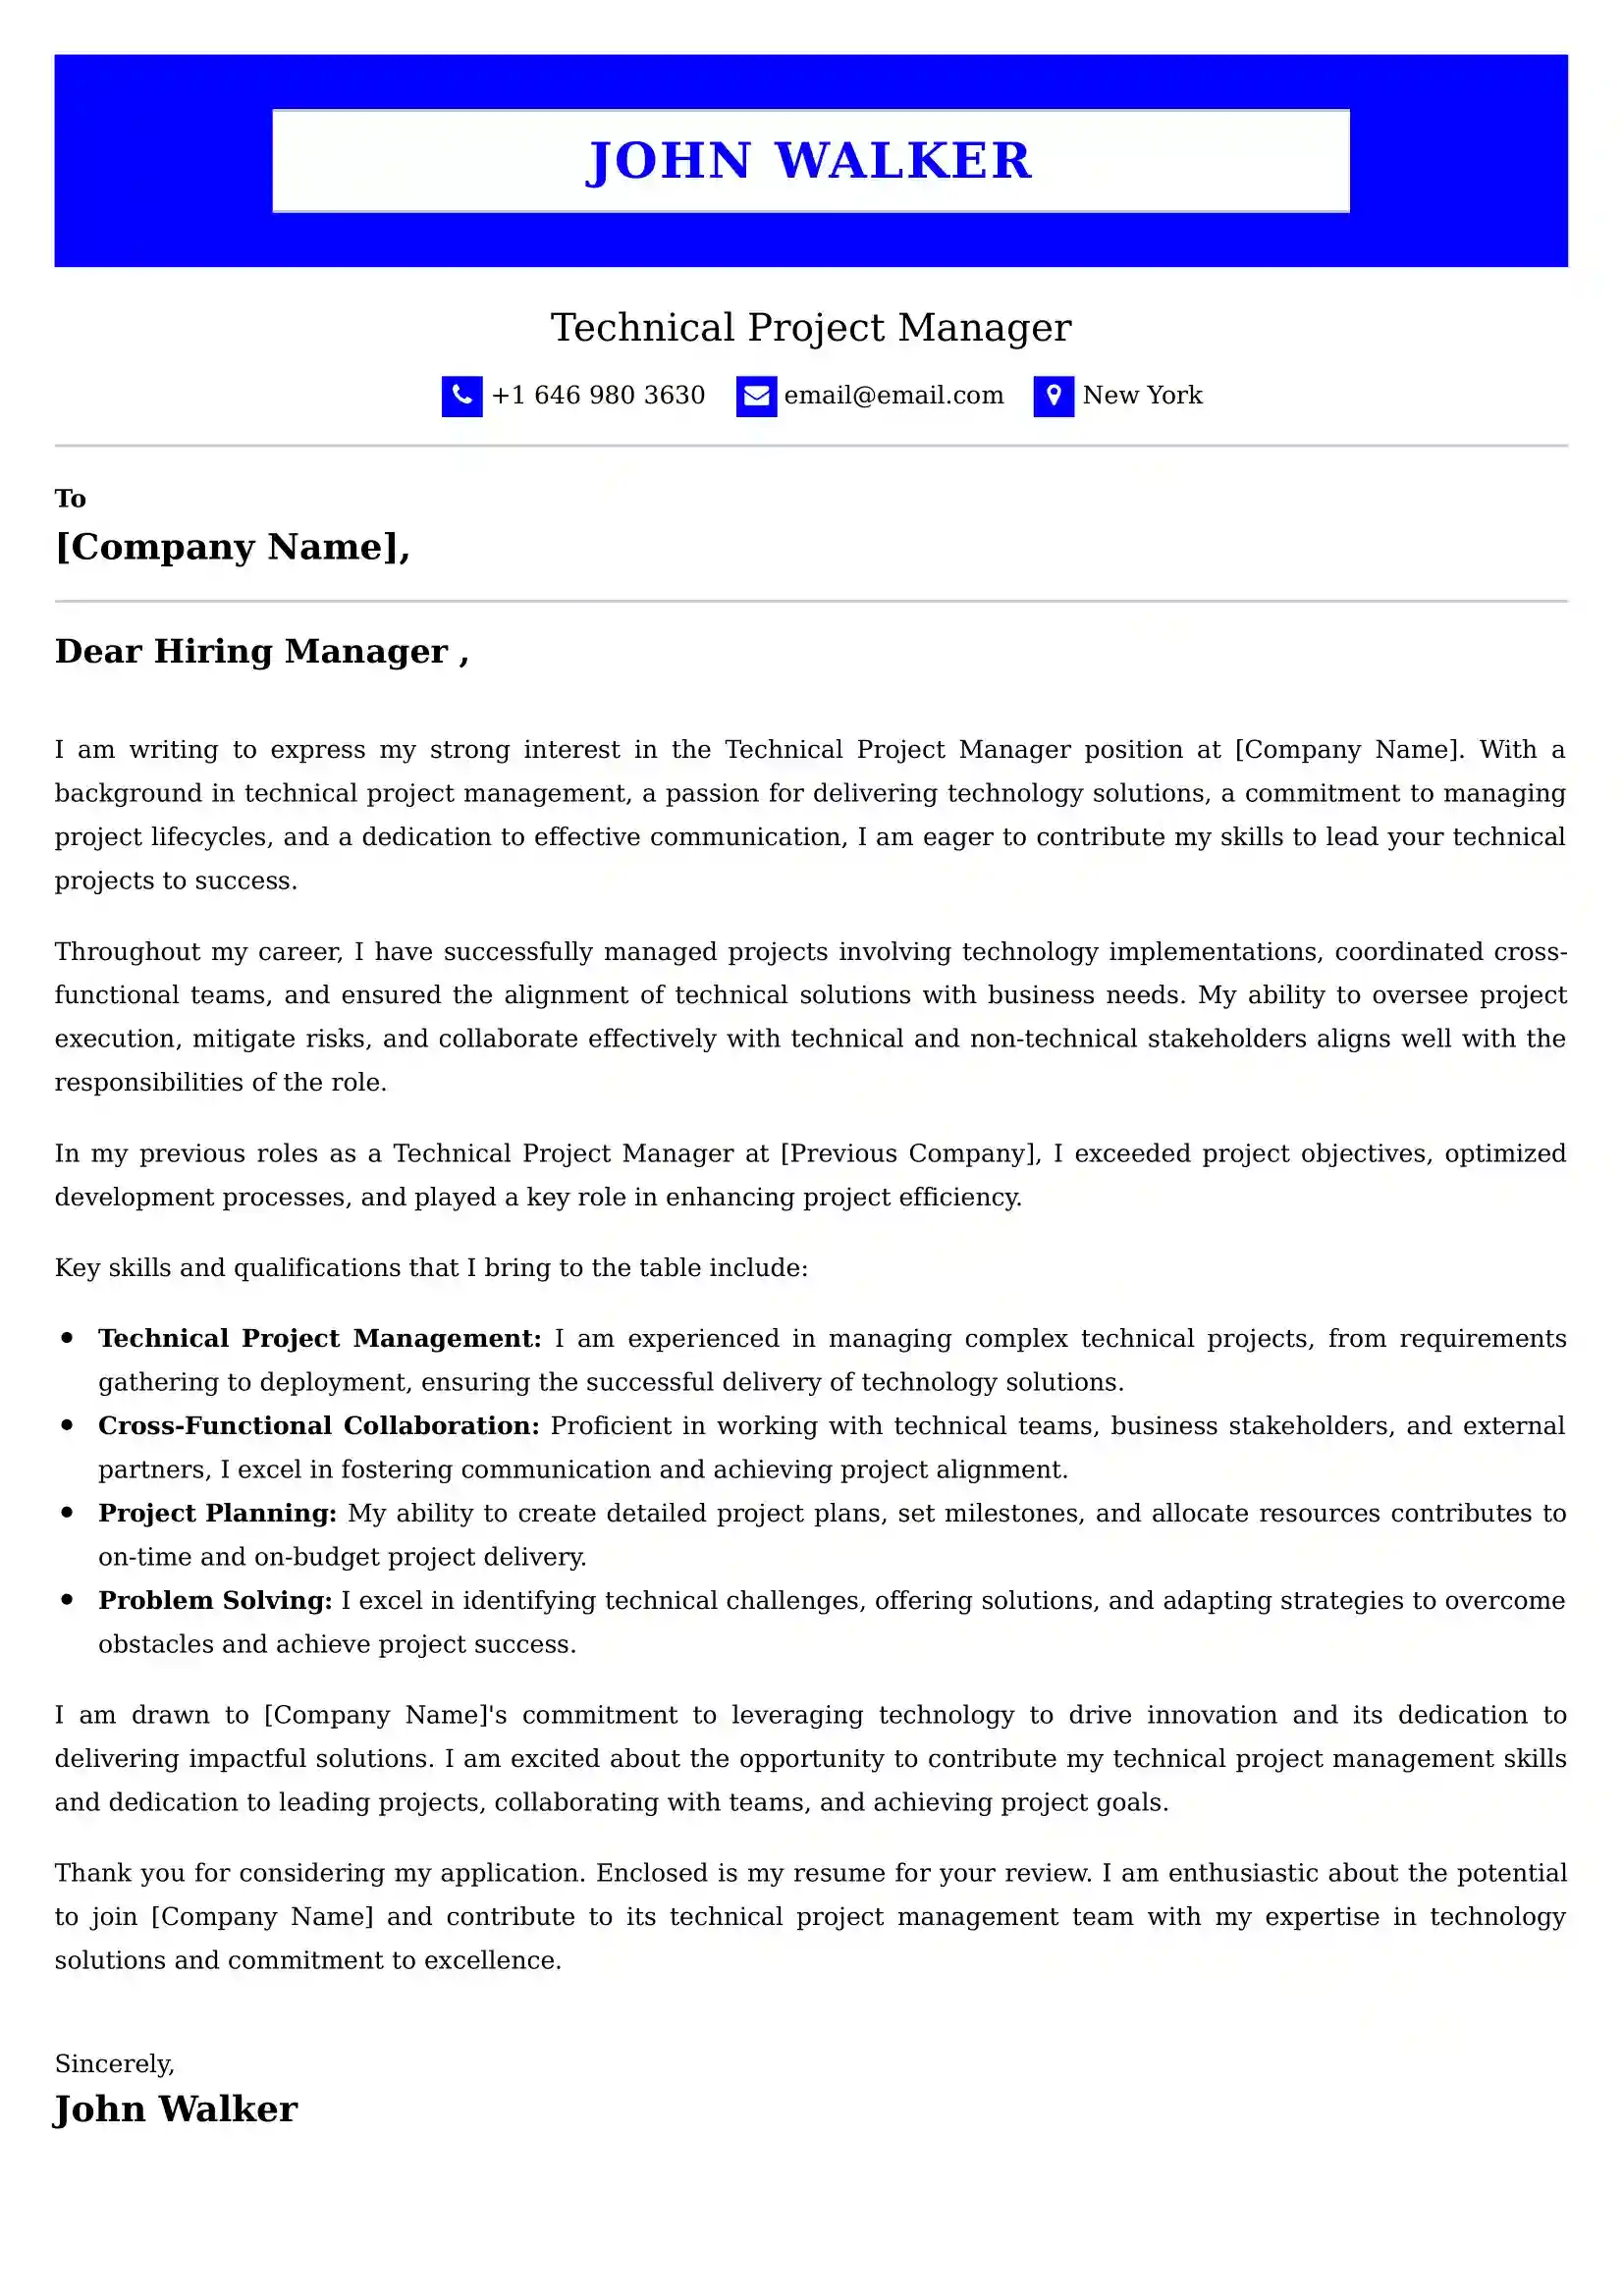 Technical Project Manager Cover Letter Examples - Latest UK Format